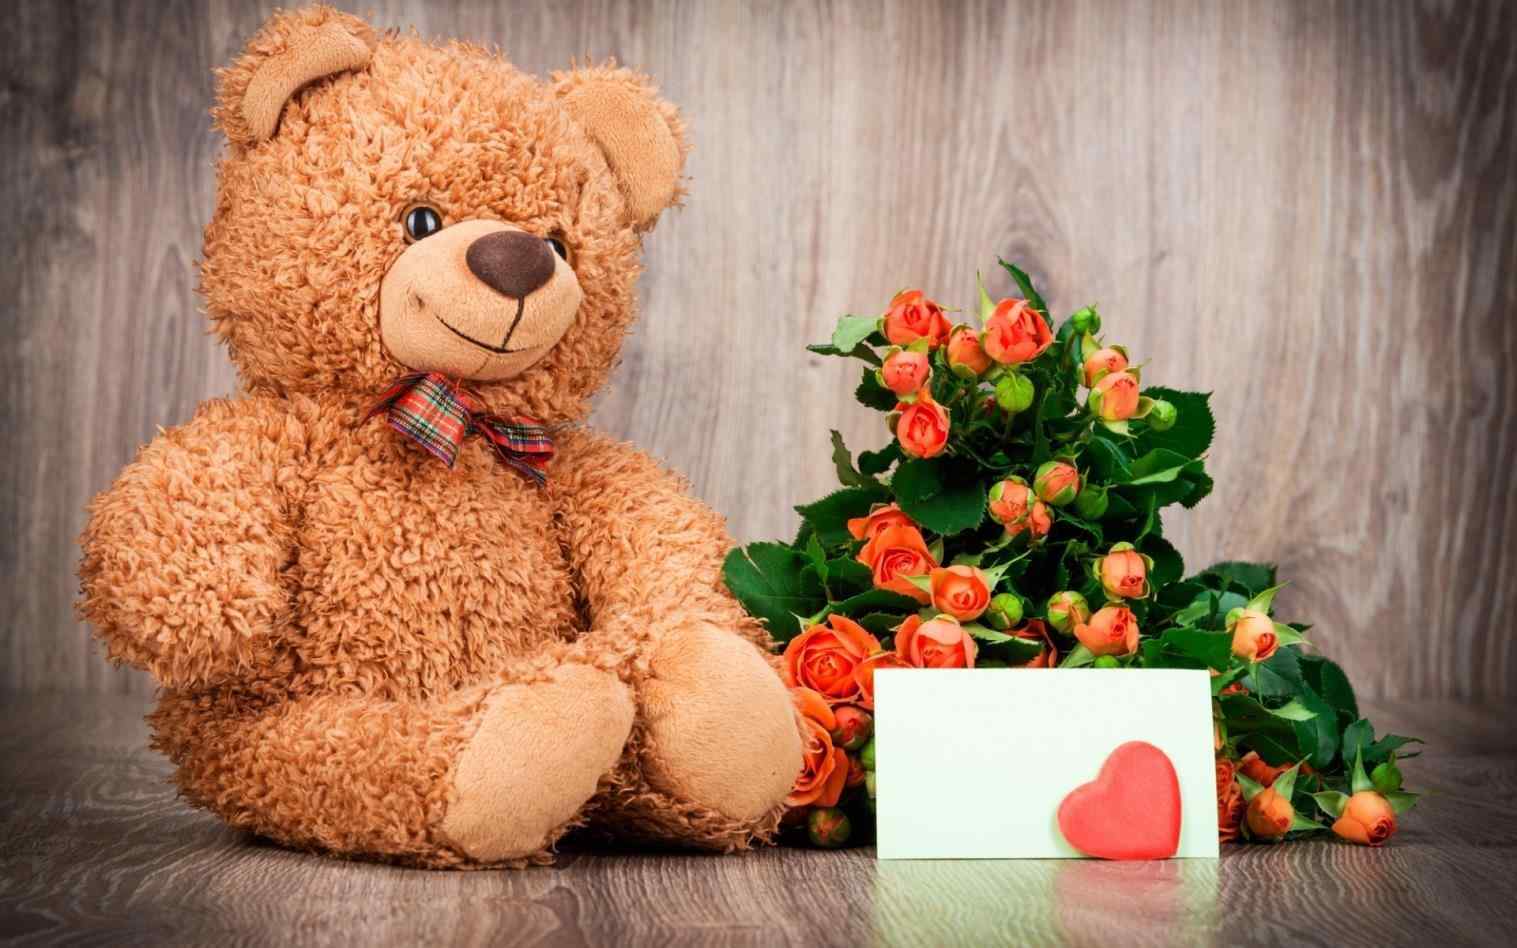 Hd Wallpapers Full Cute Teddy Bear Pictures With Roses - Peluches Y Rosas Hd , HD Wallpaper & Backgrounds